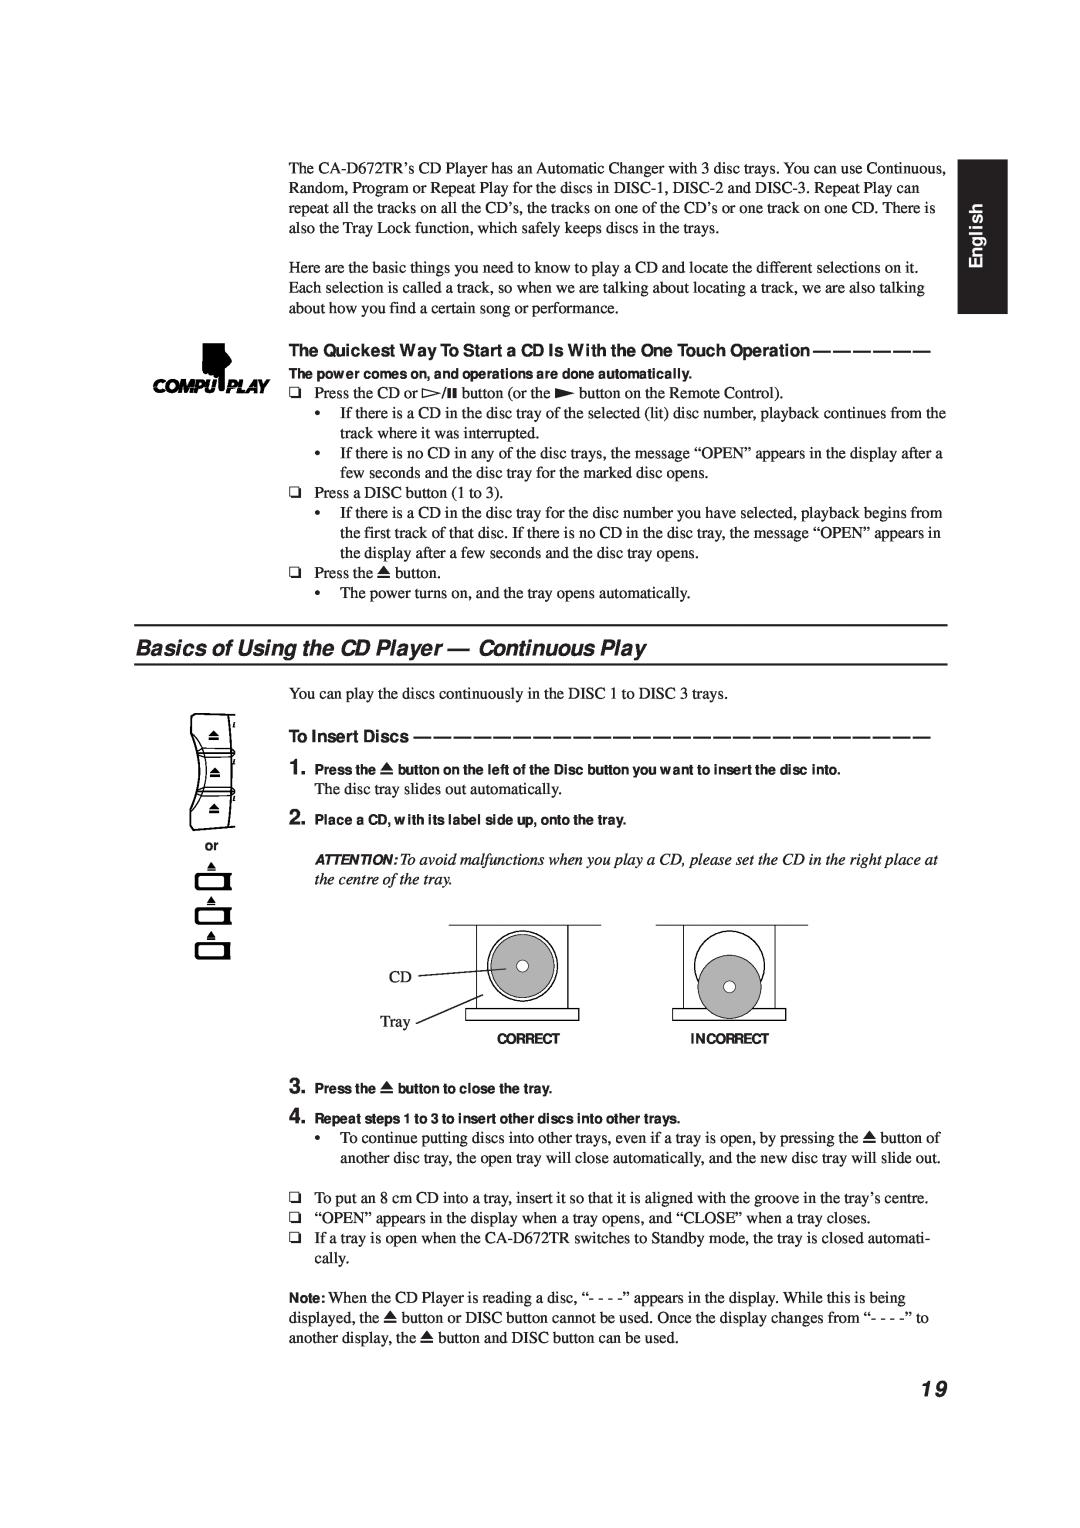 JVC CA-D672TR manual Basics of Using the CD Player — Continuous Play, To Insert Discs, English, Correctincorrect 